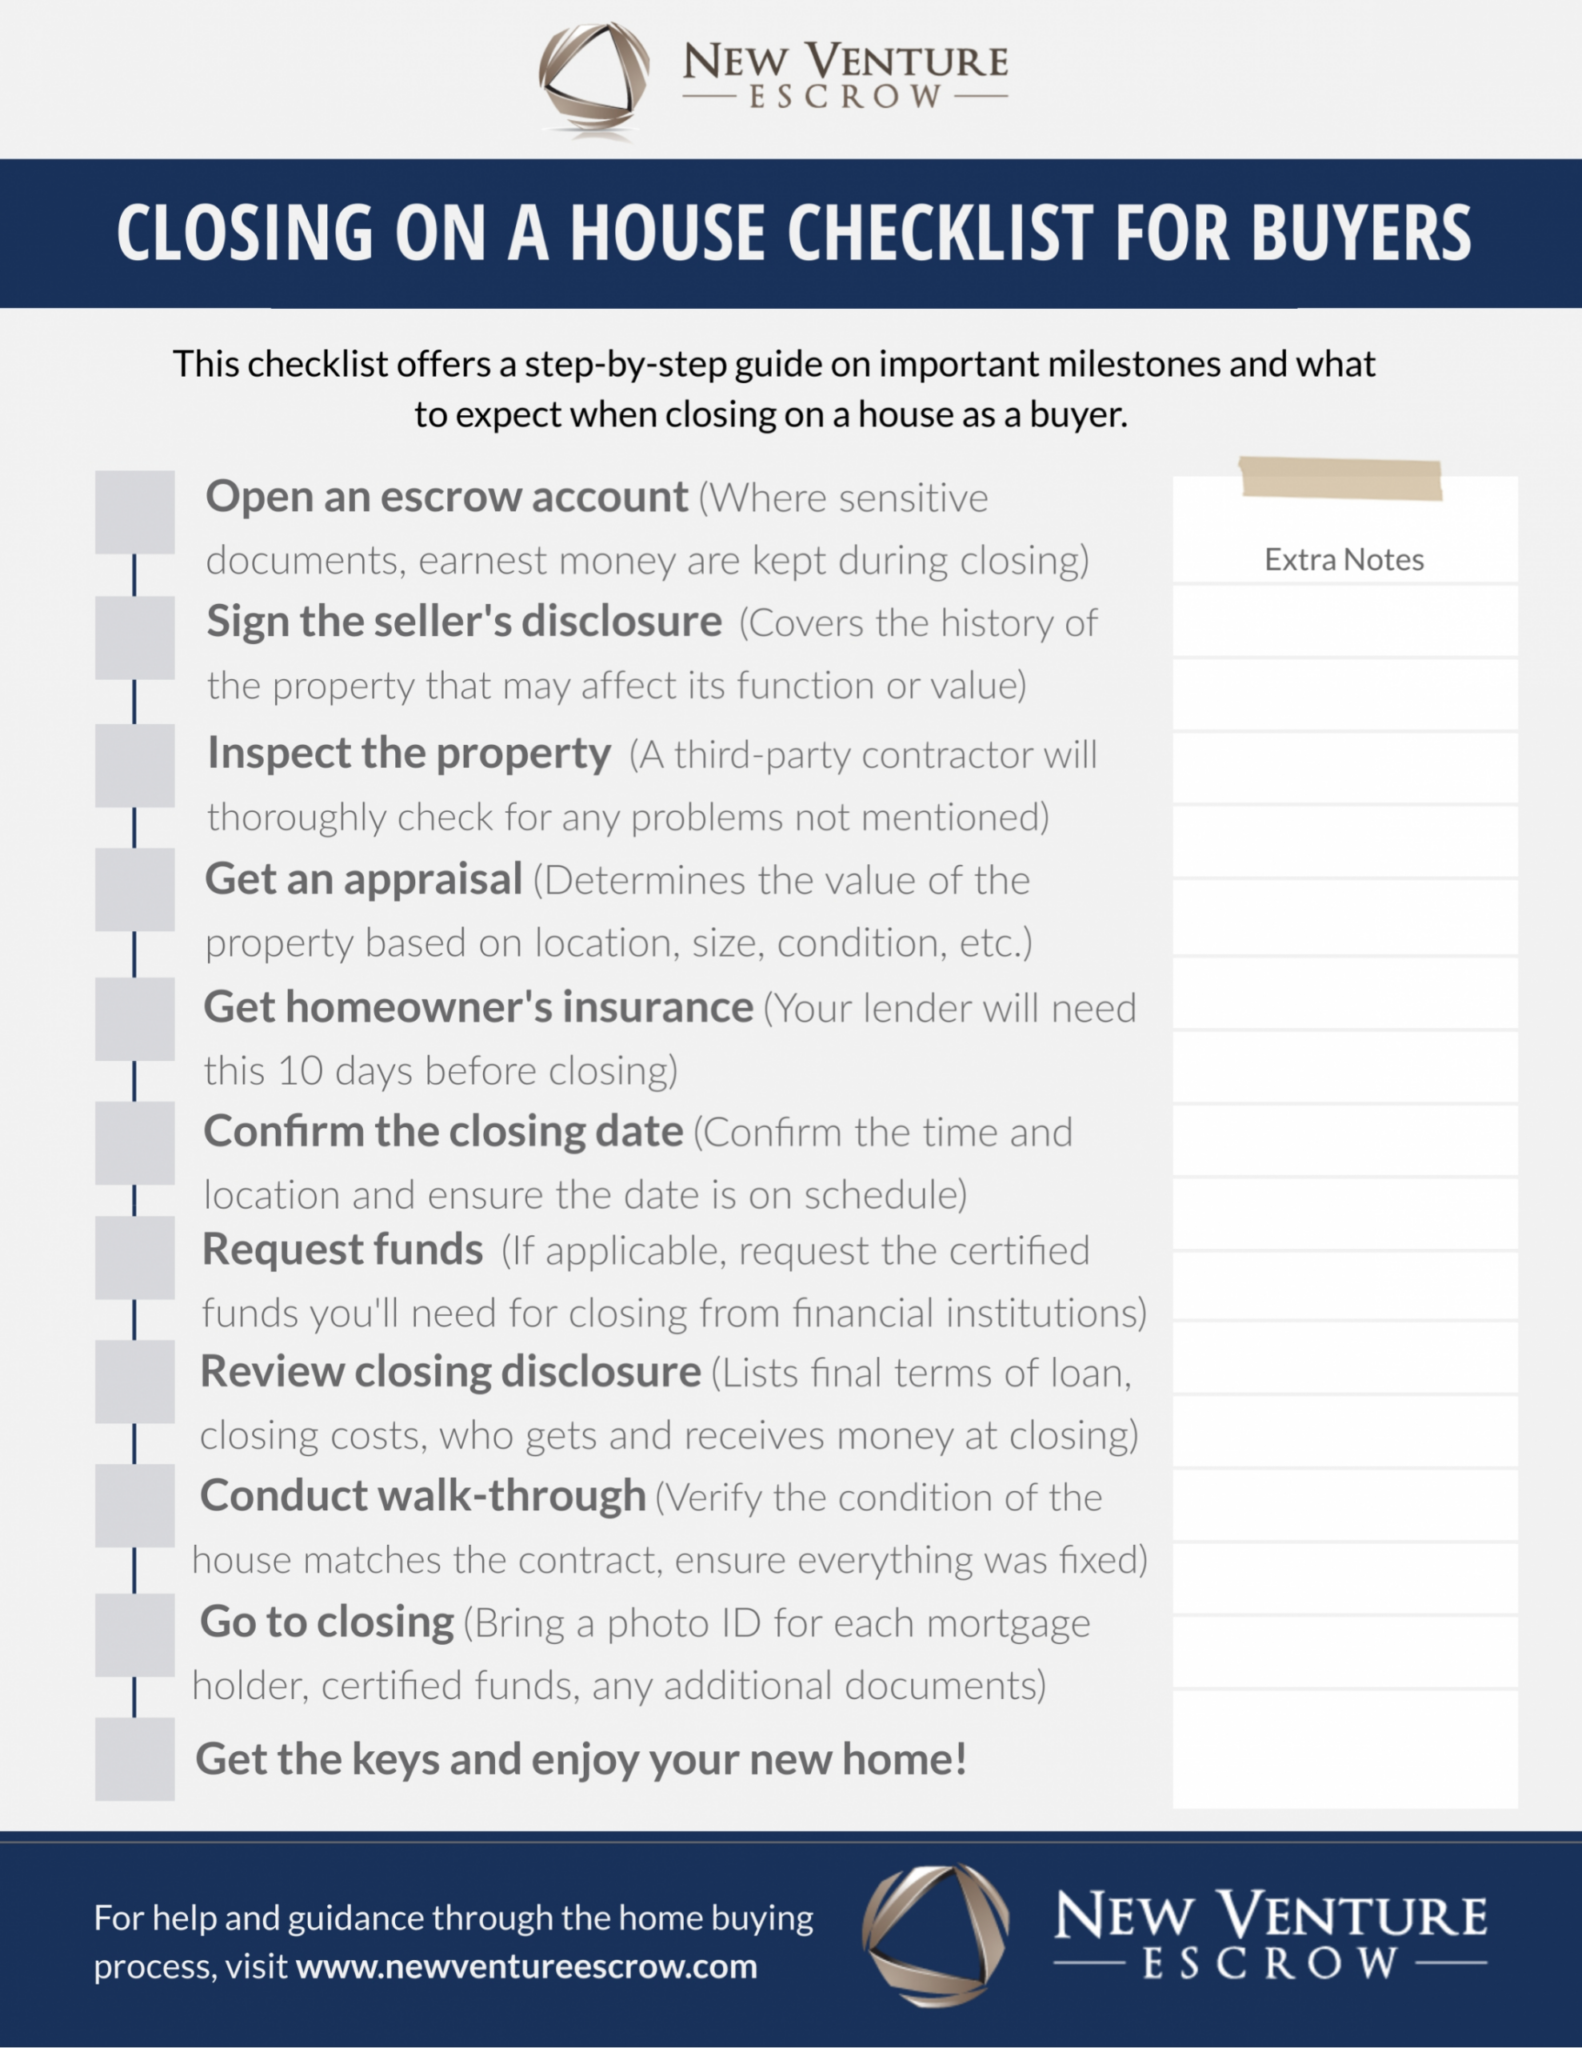 printable-closing-on-a-house-checklist-for-buyers-new-venture-escrow-home-buyer-checklist